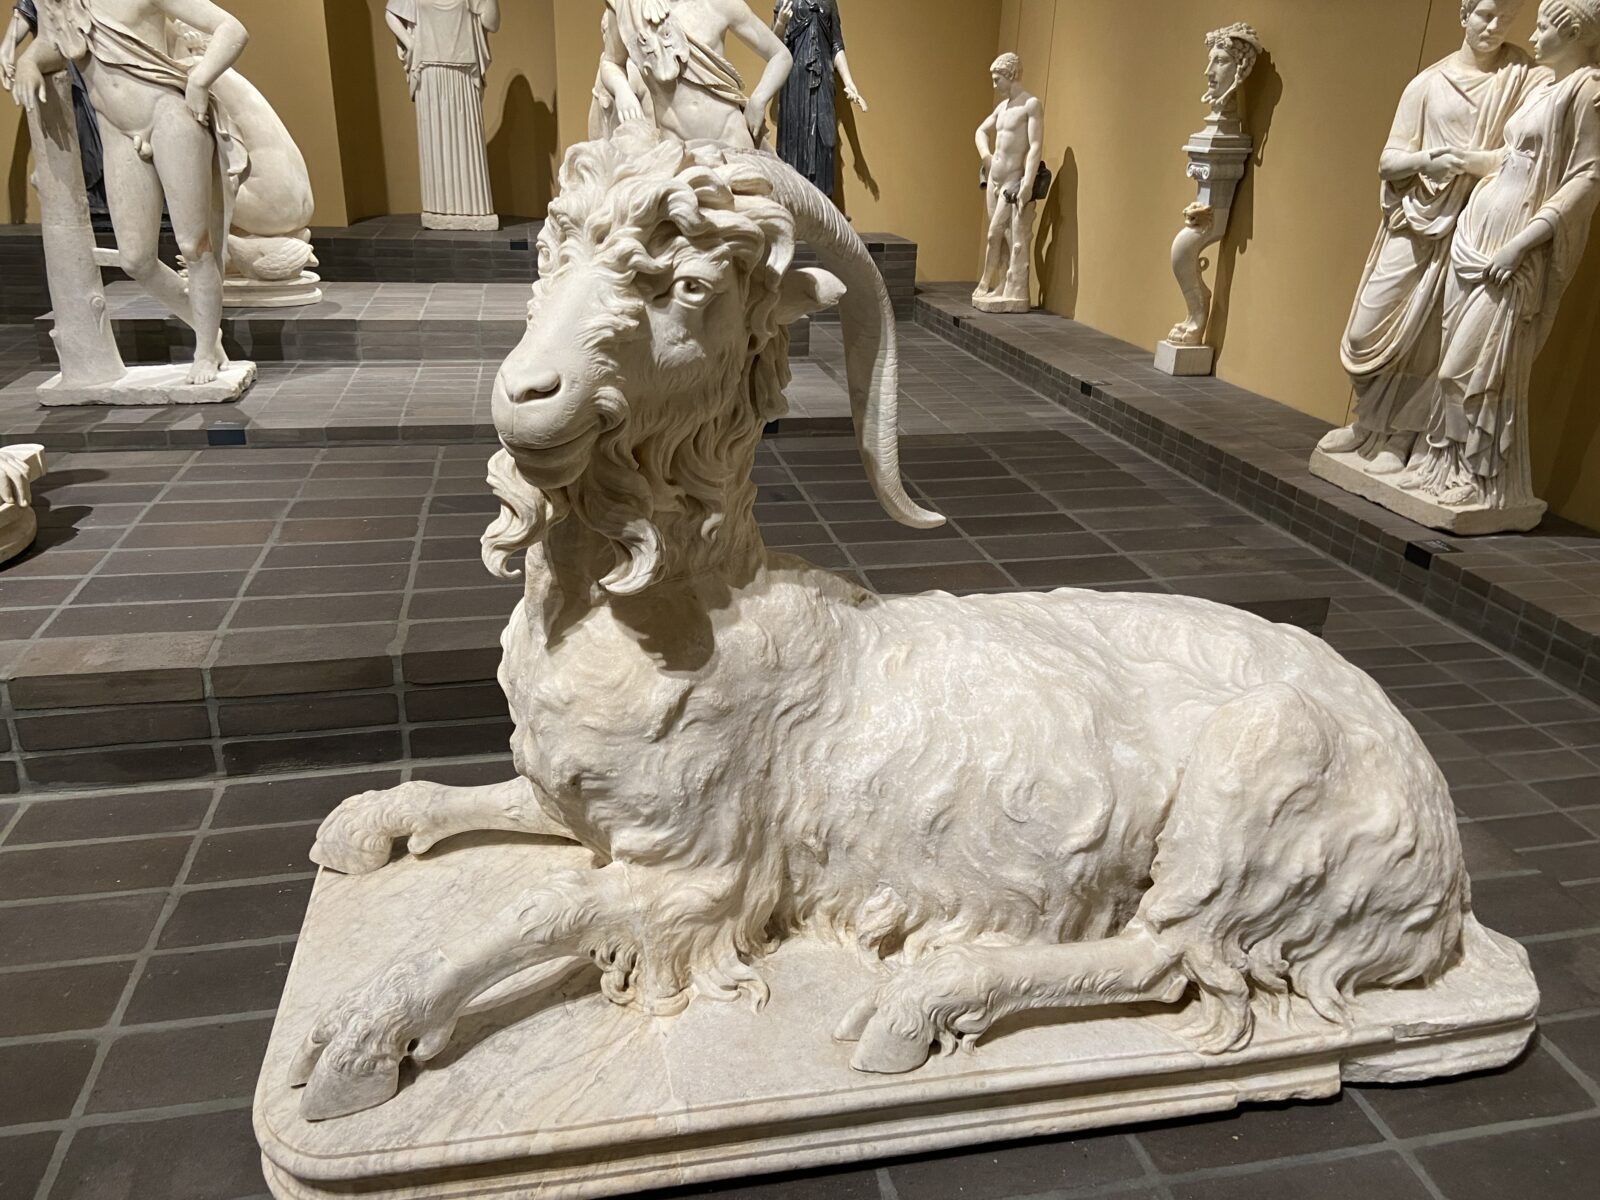 In the 17th century, Gian Lorenzo Bernini sculpted the head on this goat from the 2nd century A.D.